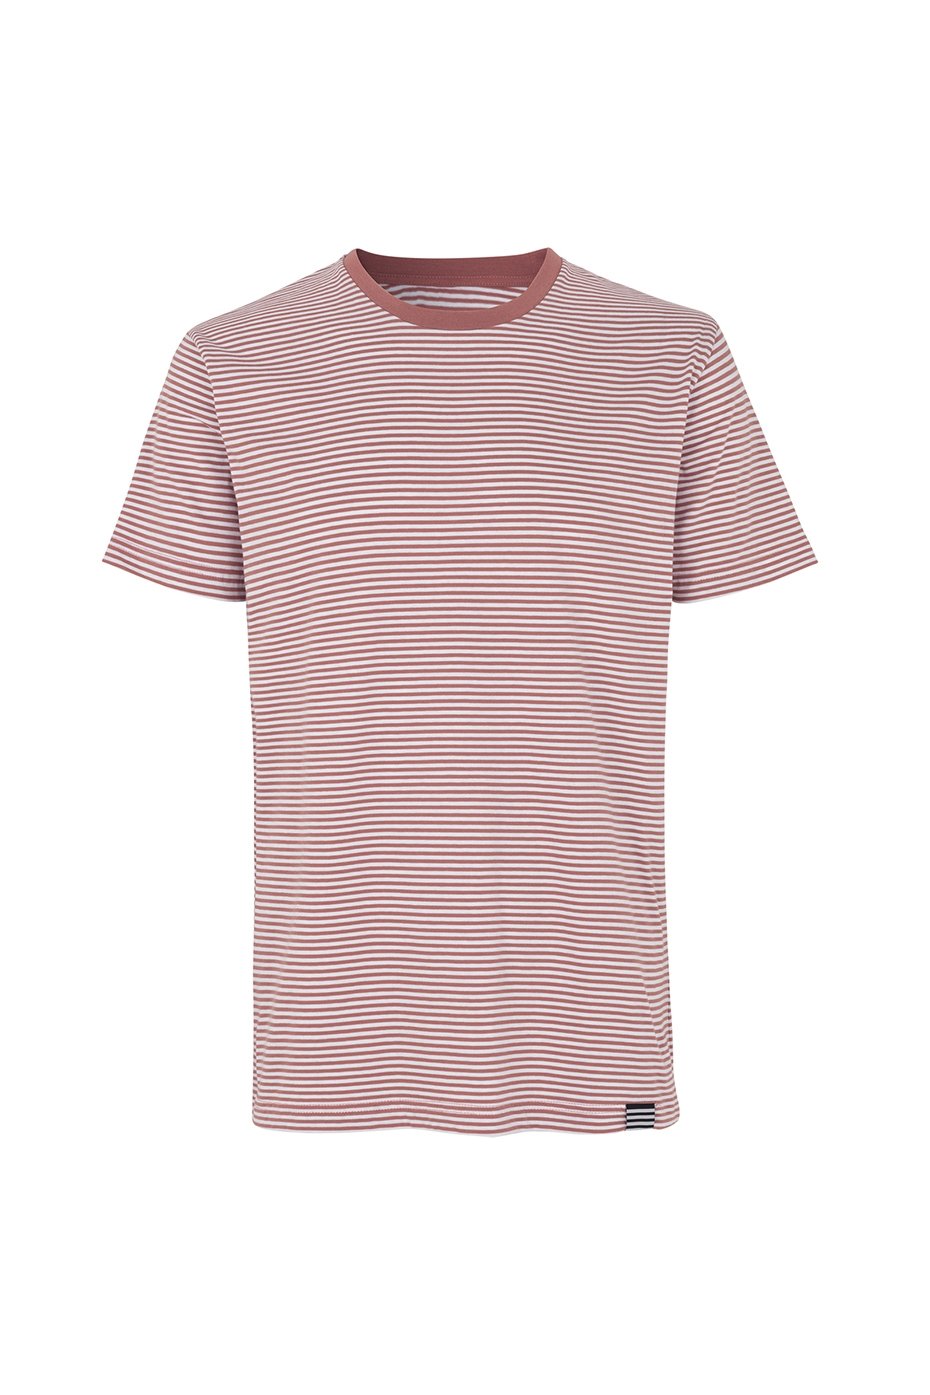 Mads Norgaard MADS NORGAARD FAVORITE MINI THOR WITHERED ROSE WHITE STRIPE TEE